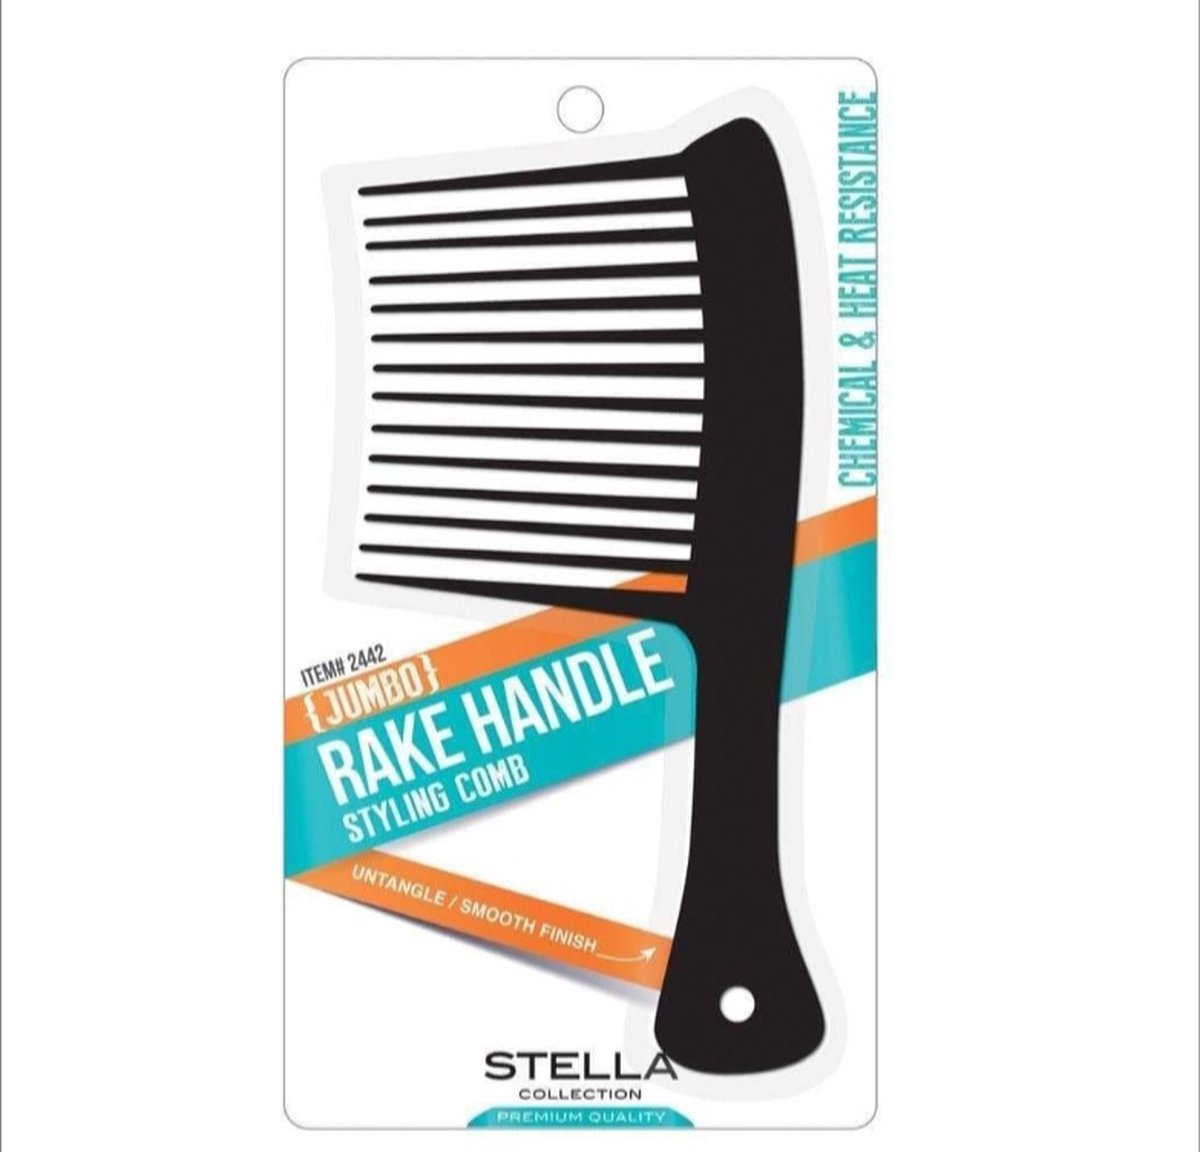 RAKE HANDLE, STYLING COMB for curly Hair